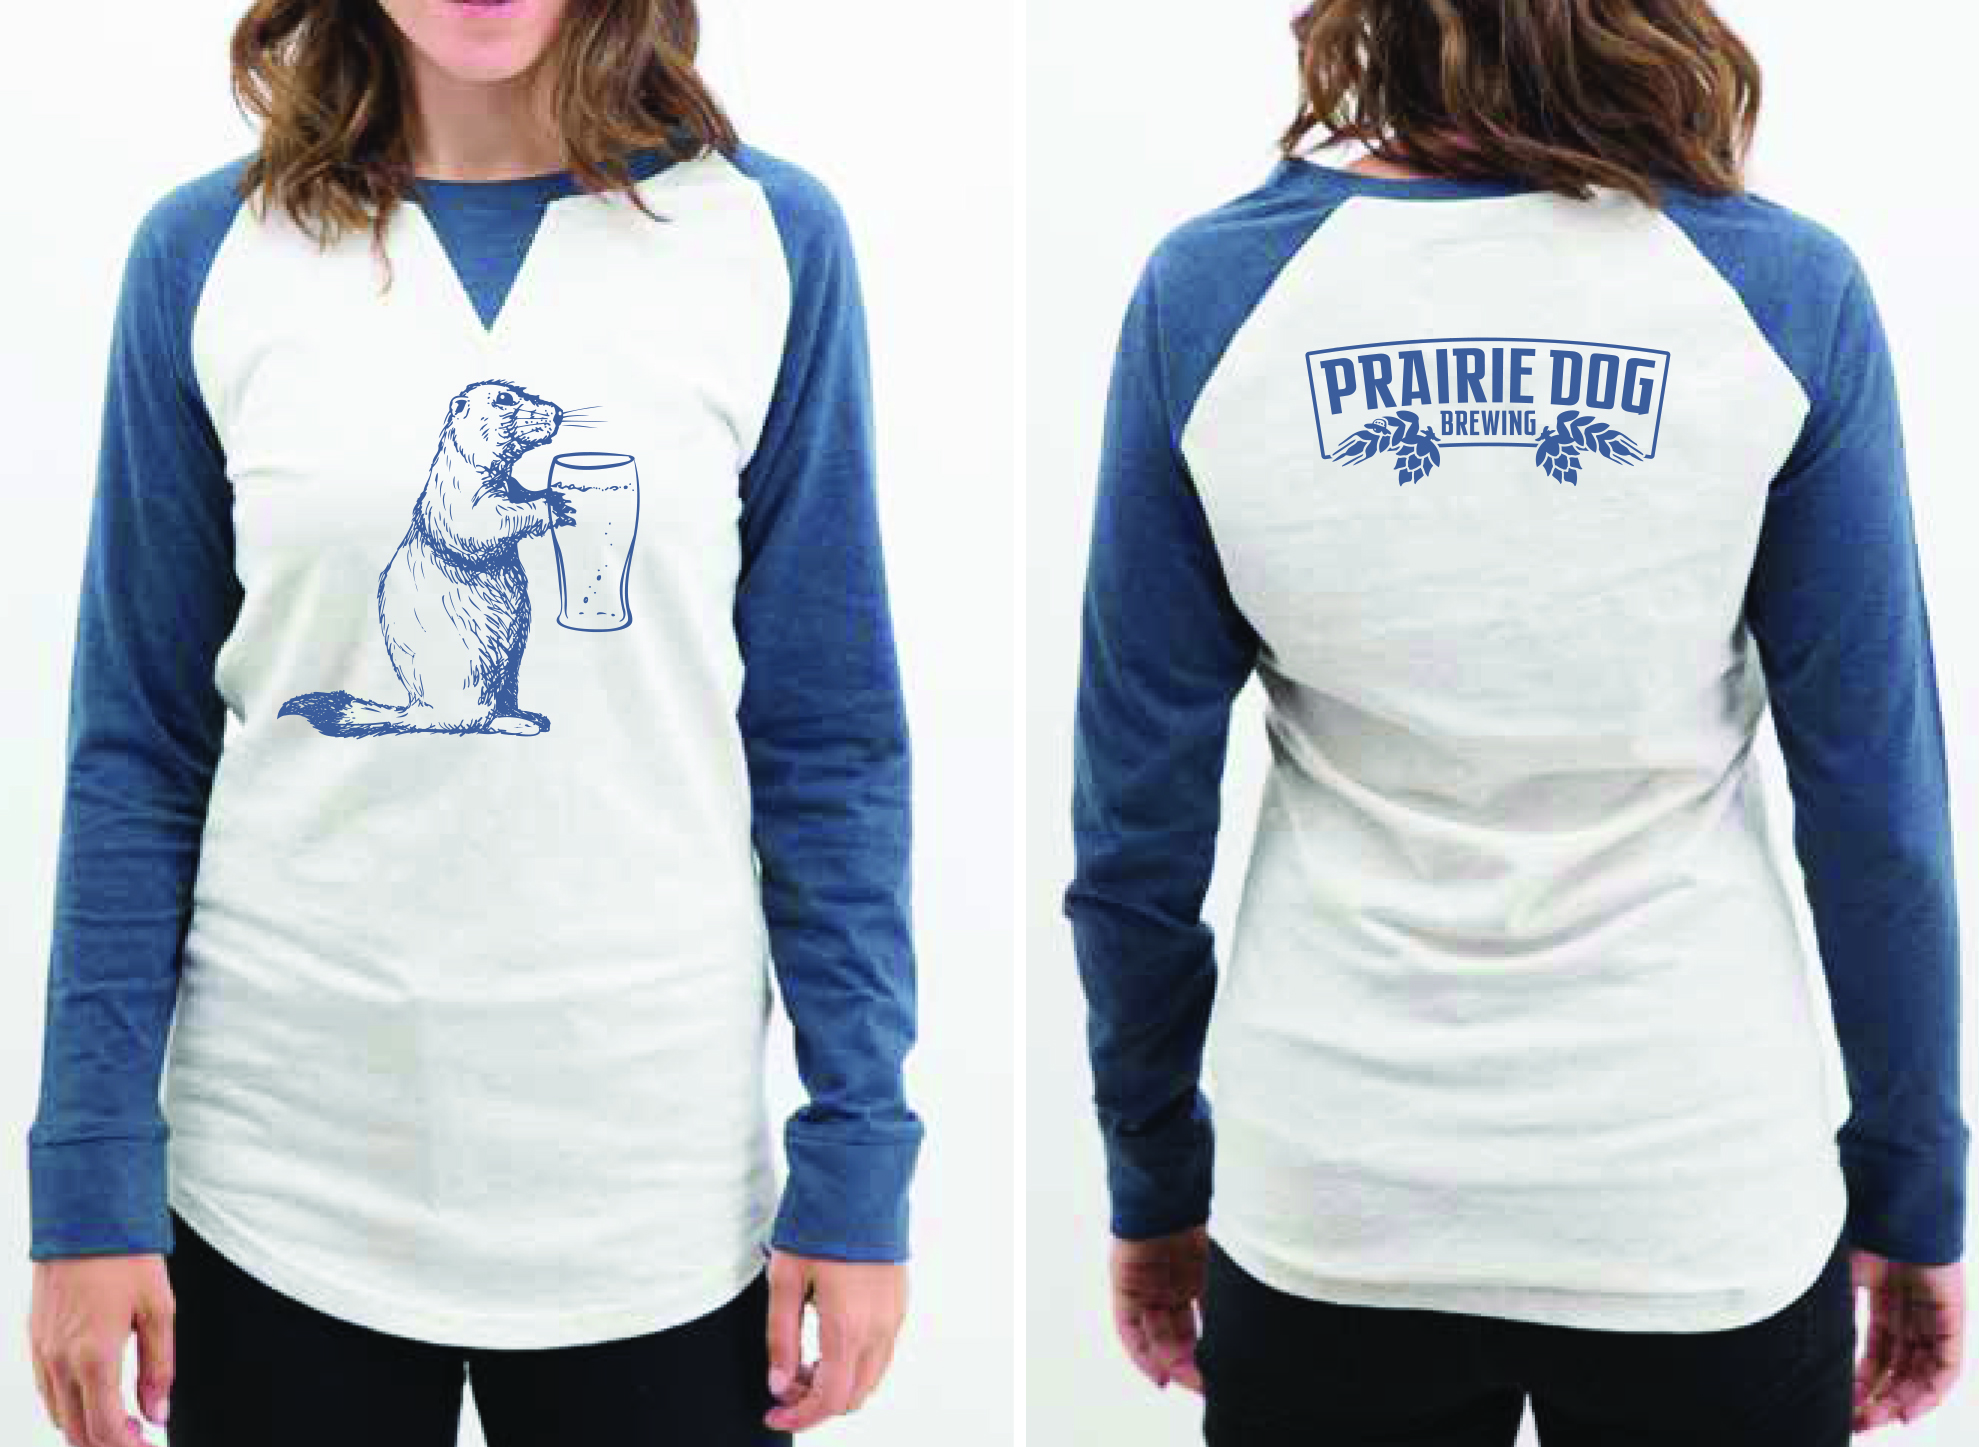 A picture of a woman wearing a navy and white baseball t-shirt with Alby the Prairie Dog on the front and the Prairie Dog Brewing banner on the back.